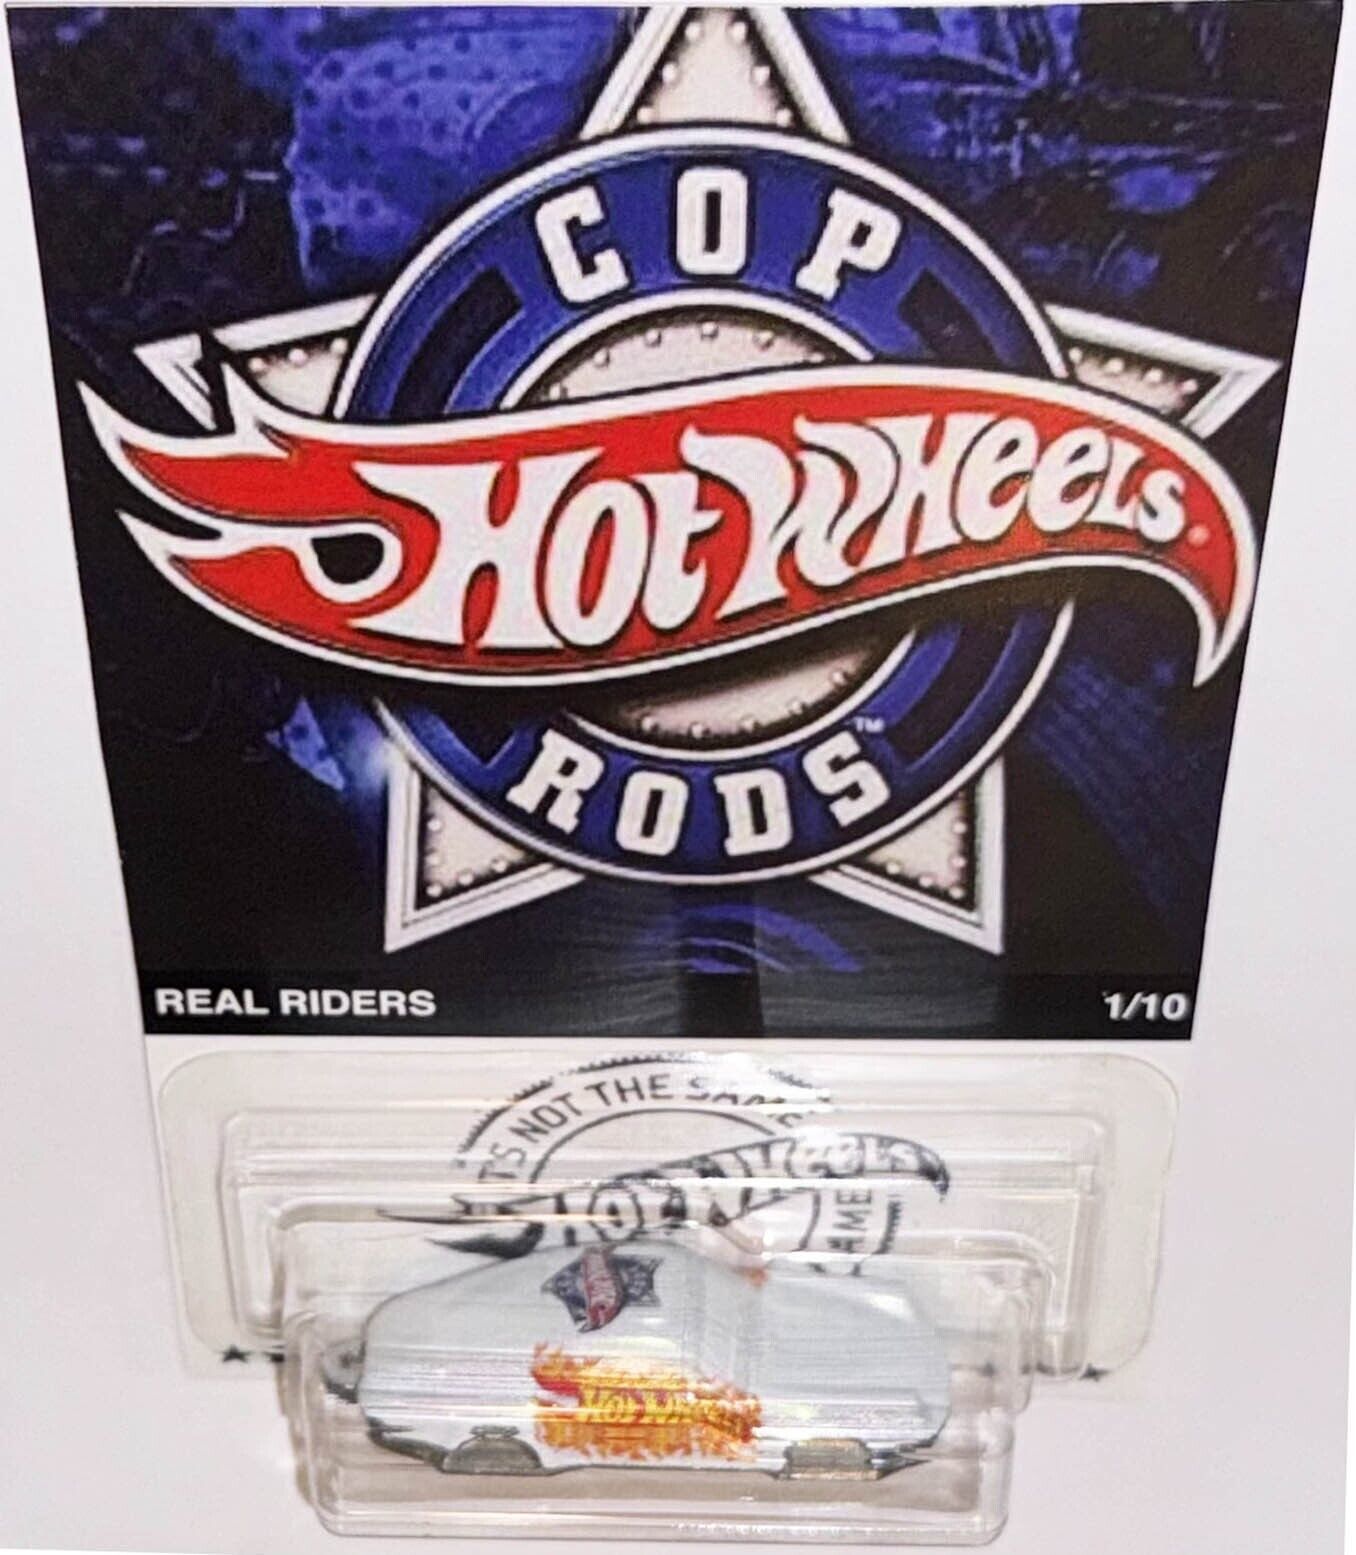 Primary image for PORSCHE 911 Carrera Custom Hot Wheels COP RODS Series w/ Real Riders